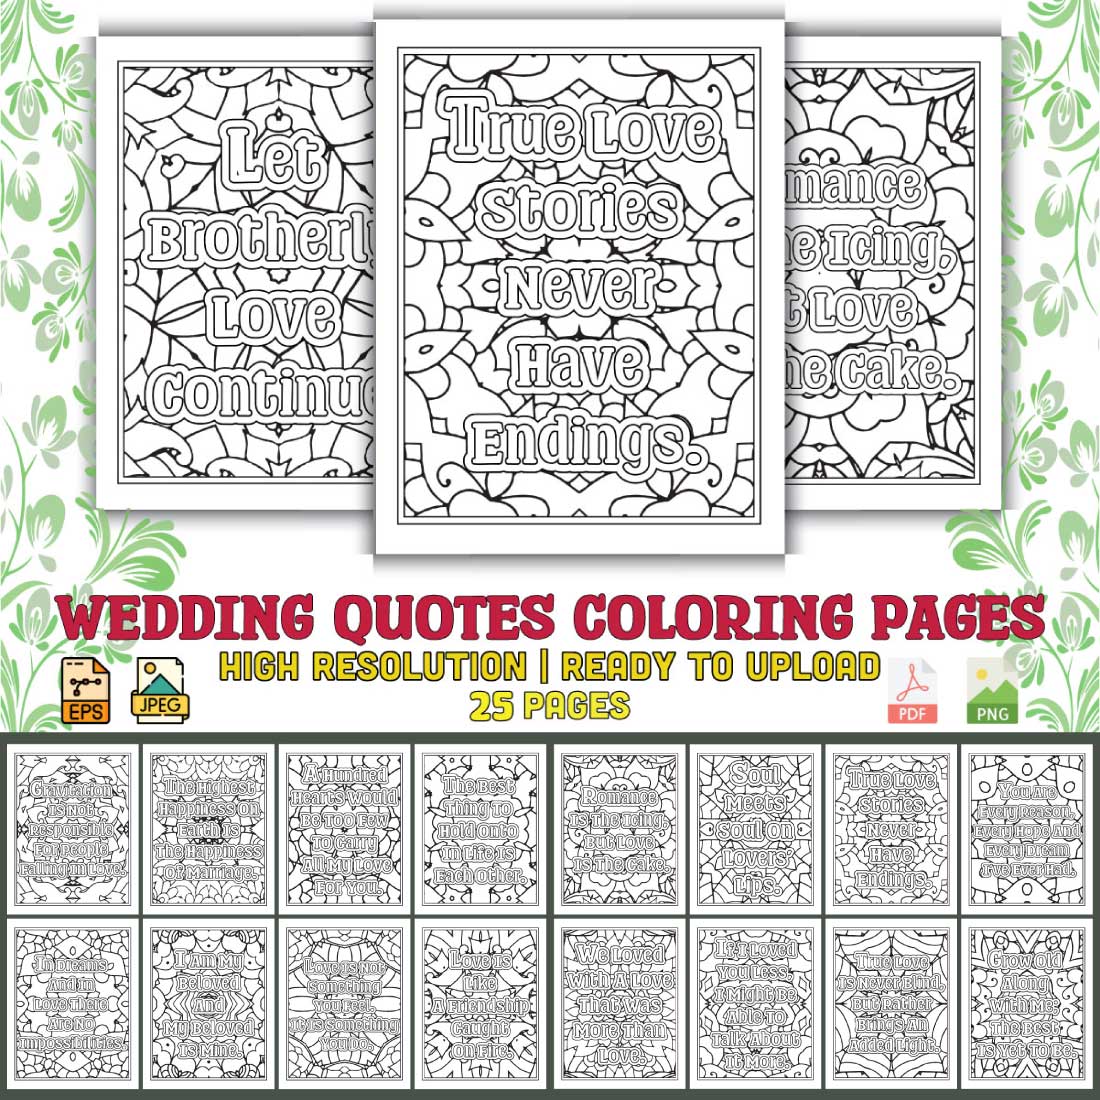 Wedding Quotes Coloring Pages for Adults KDP cover image.